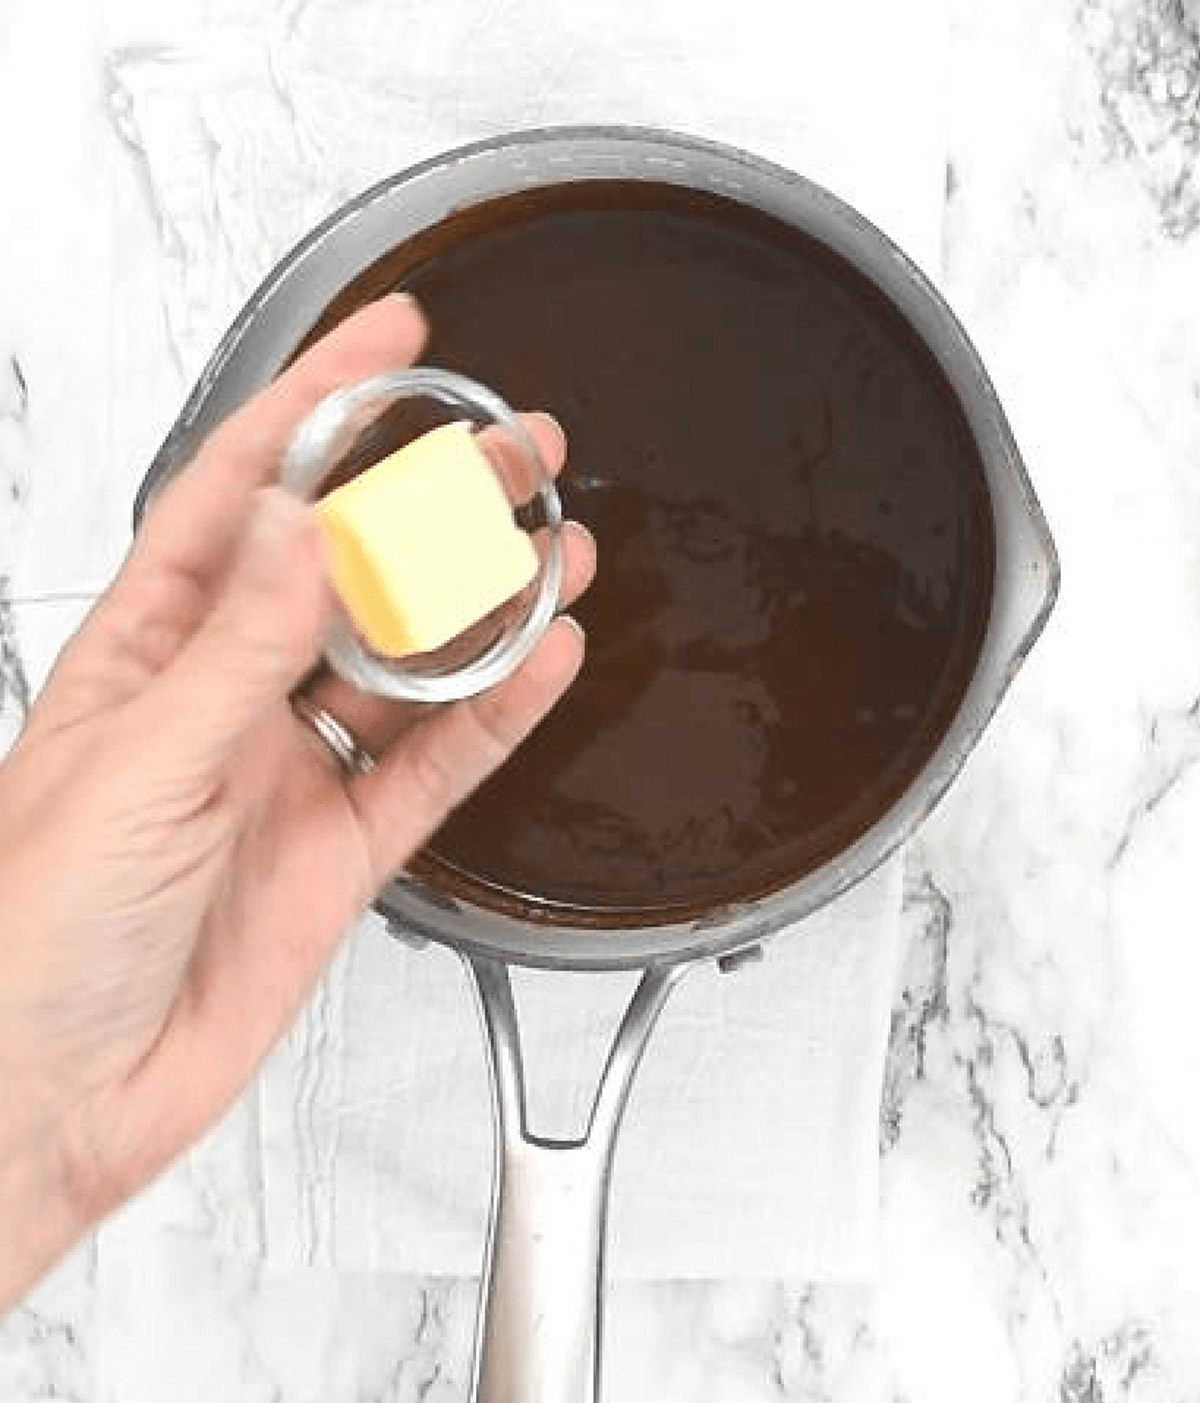 Adding butter to chocolate in pan.